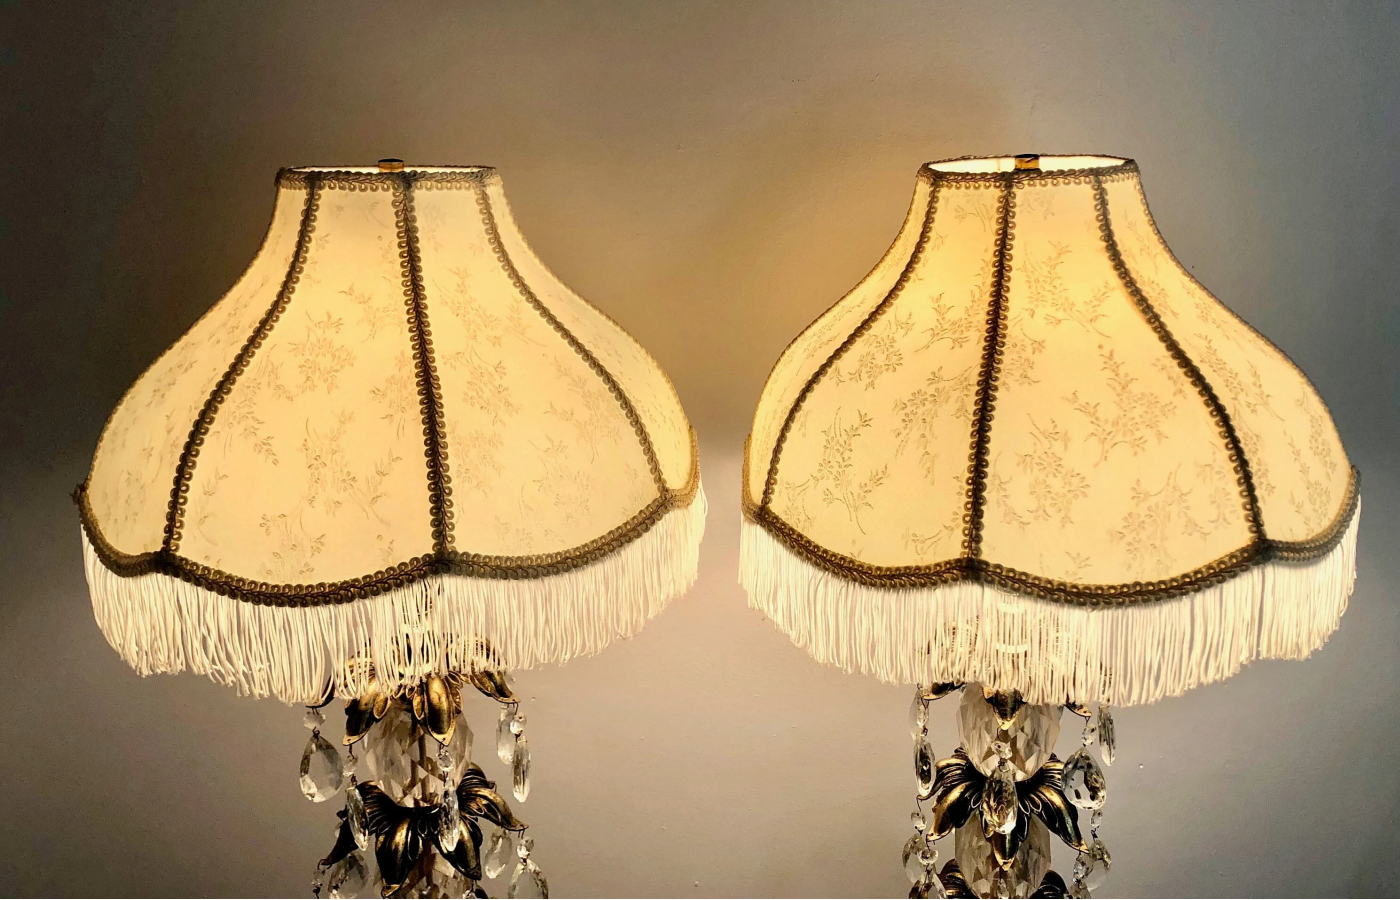 Decorative Retro Tassel Lamp: Bringing a Touch of Vintage to Your Home